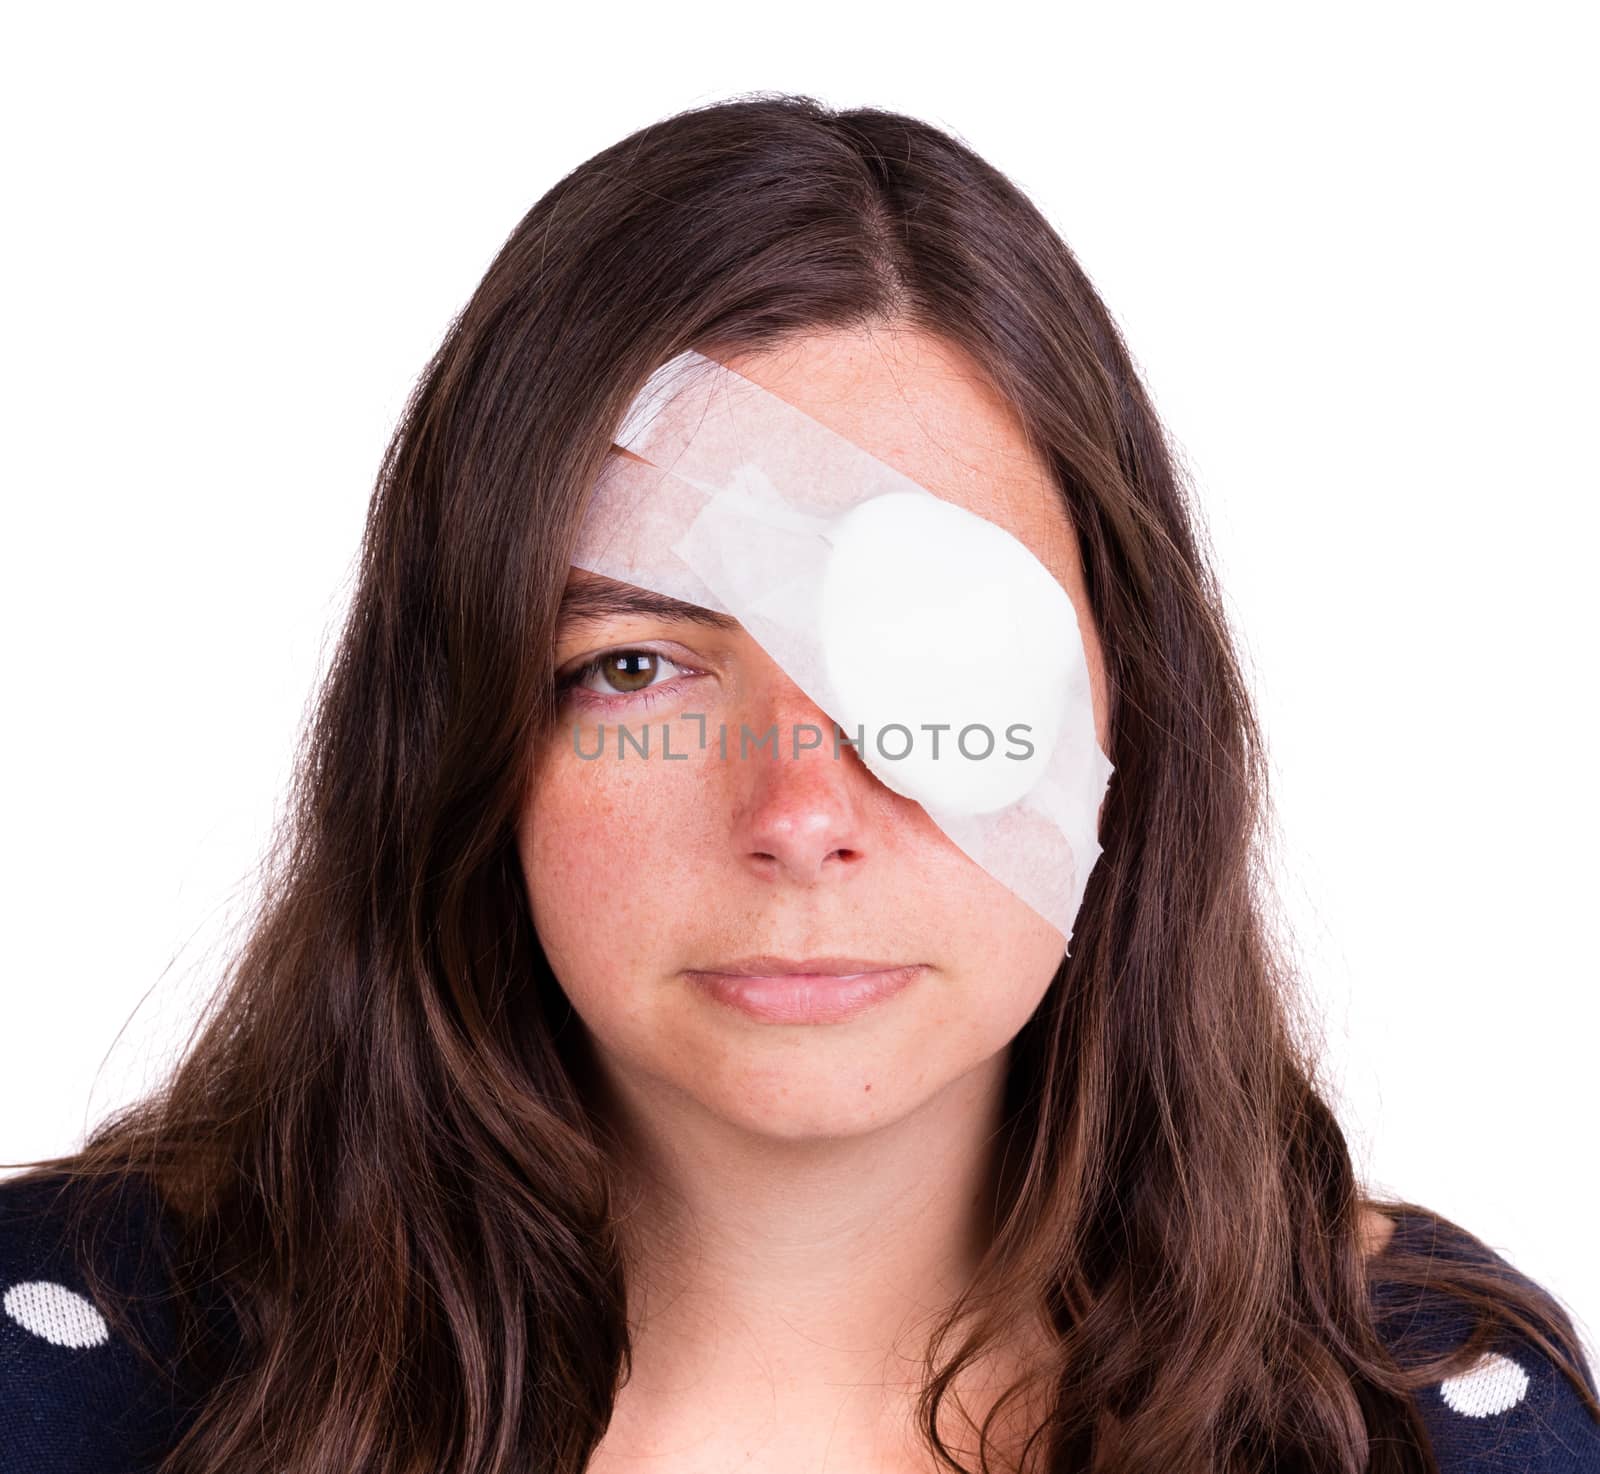 Portrait of woman wearing eye patch as protection after injury by michaklootwijk